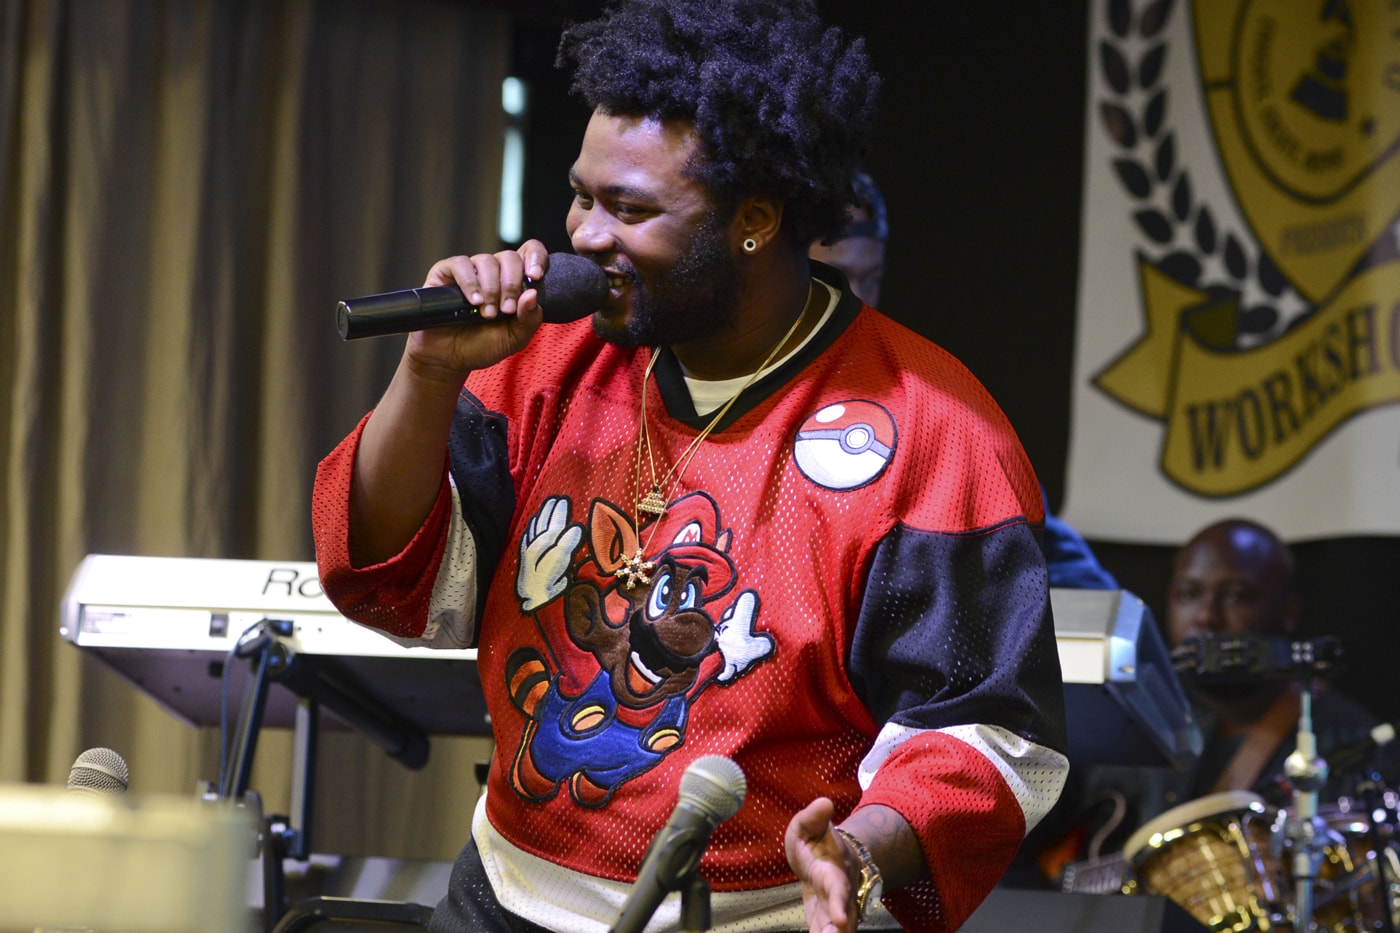 James Fauntleroy, "How To Survive In A World"